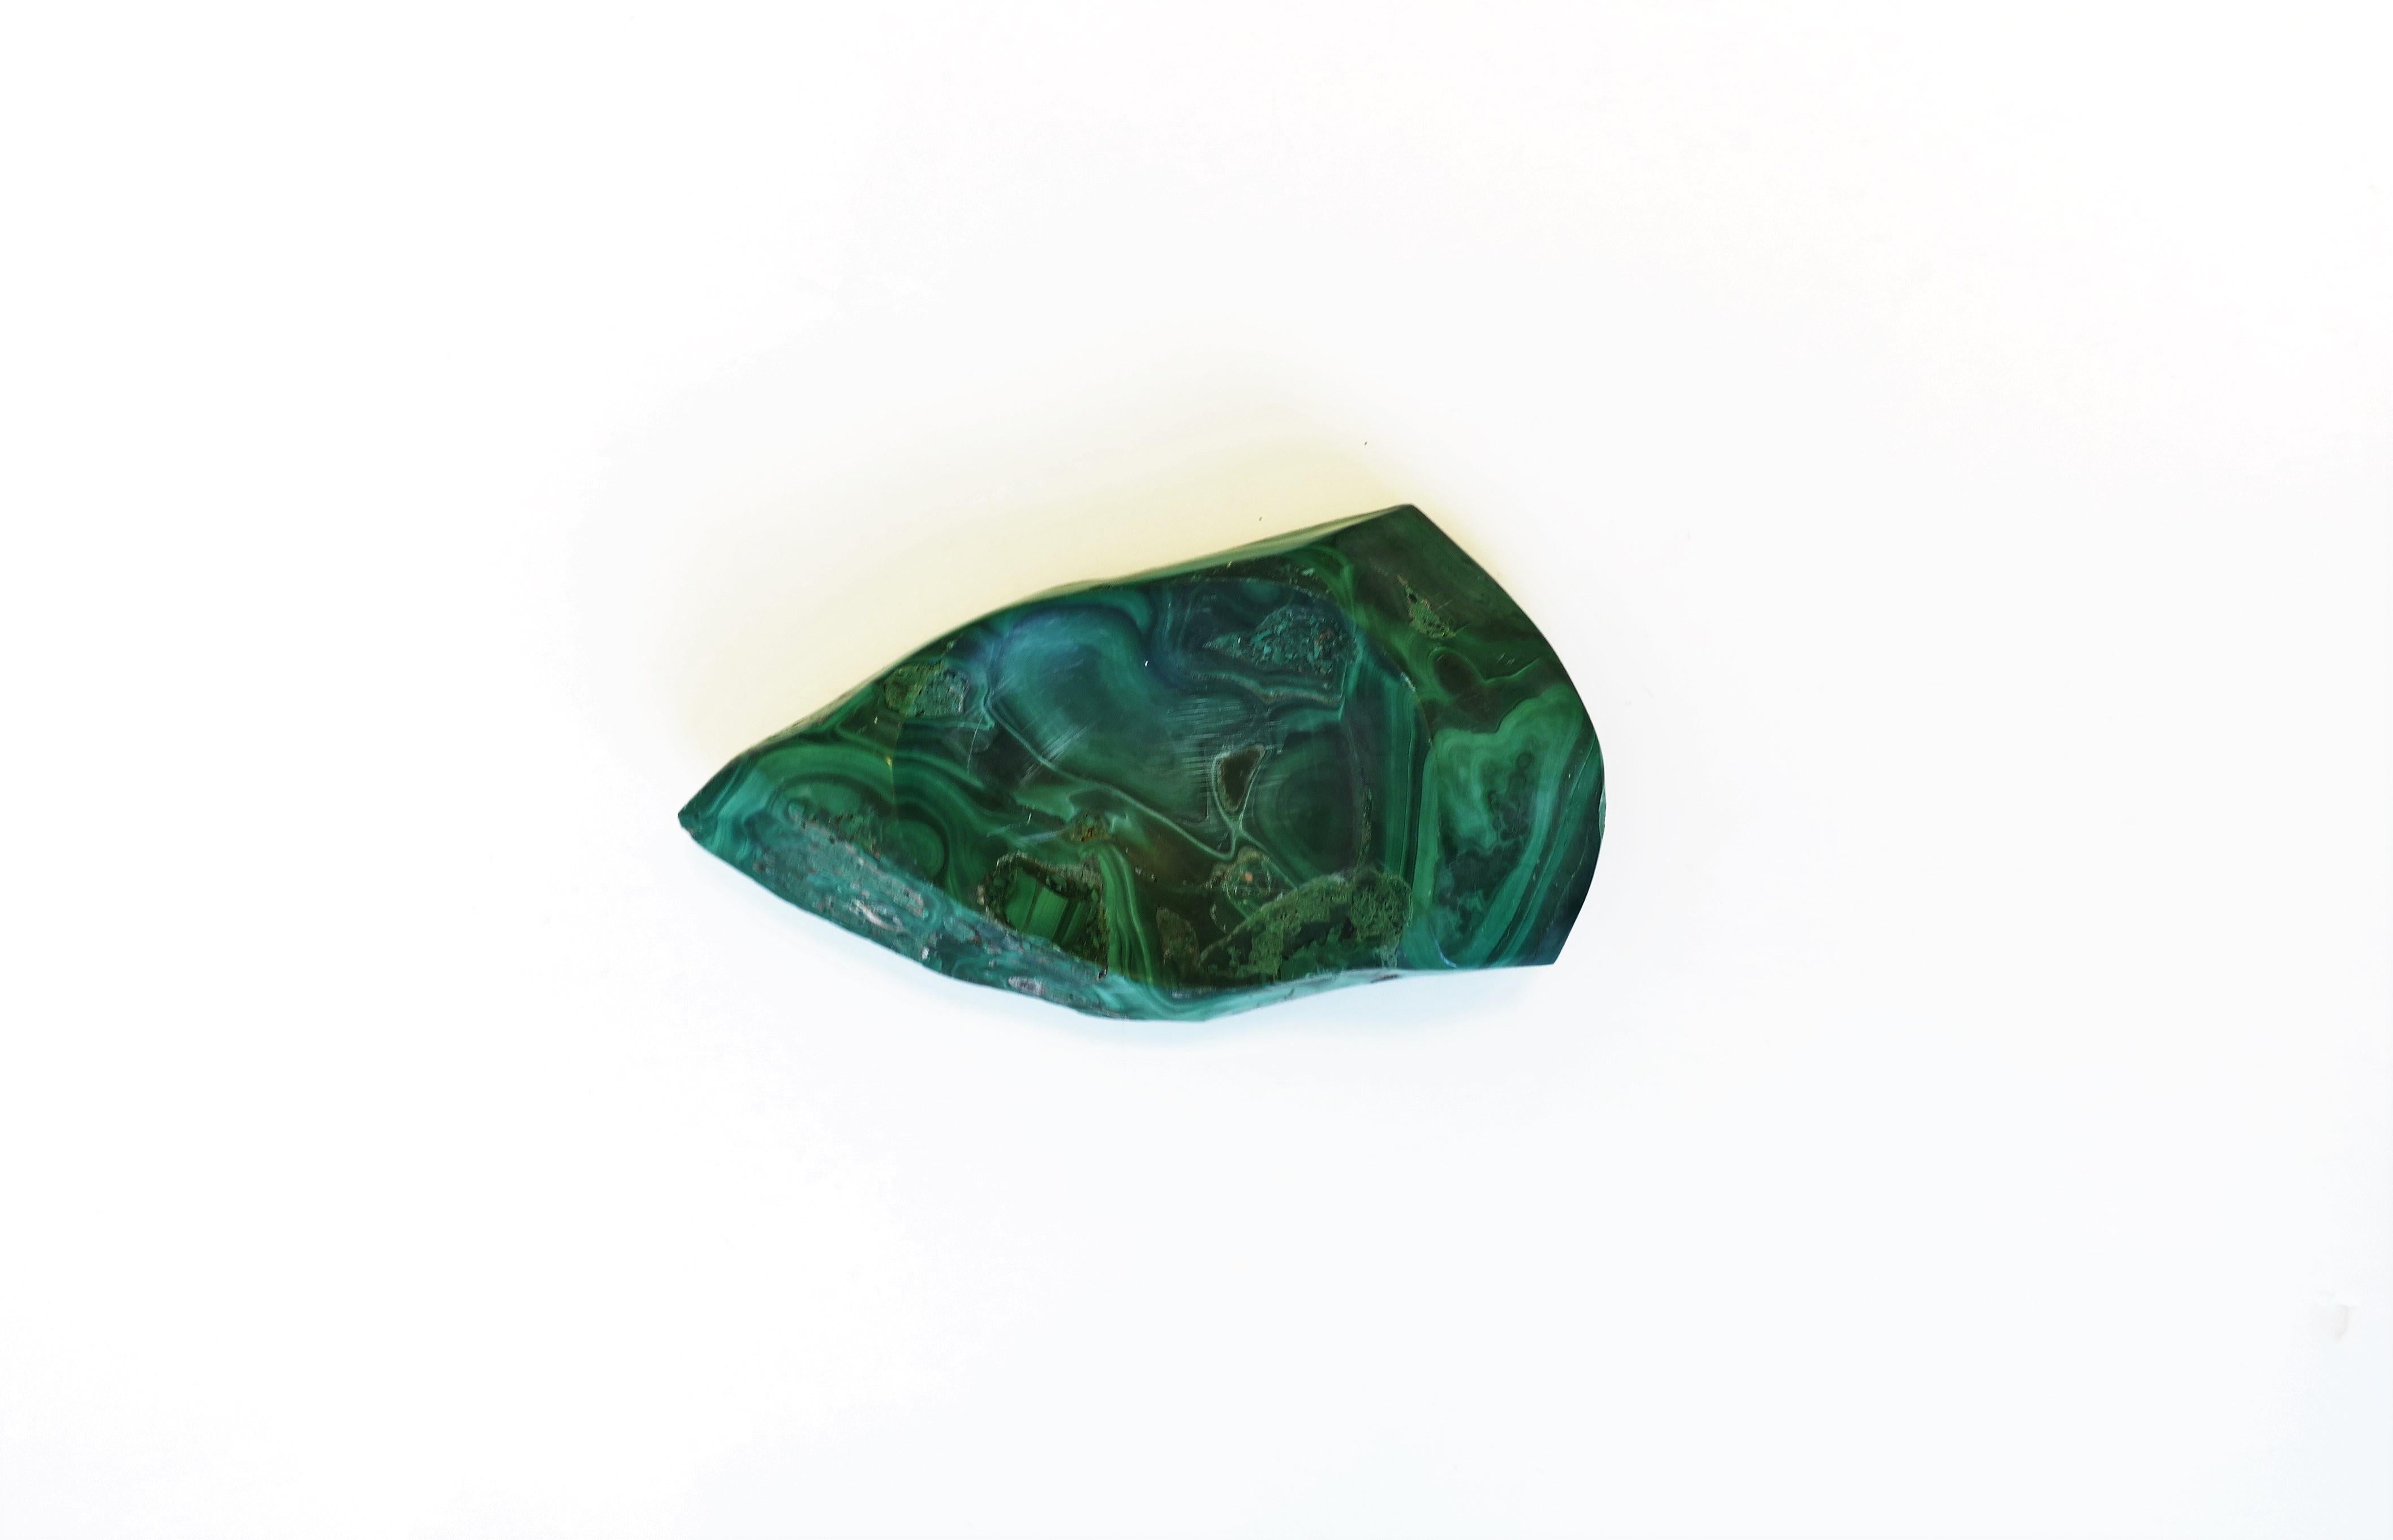 A green malachite jewelry dish or desk vessel, circa 20th century. Piece can work as a small jewelry/trinket dish, a standalone decorative object, or paperweight/desk accessory for small items, etc. Convenient for a table, office, desk, shelf,